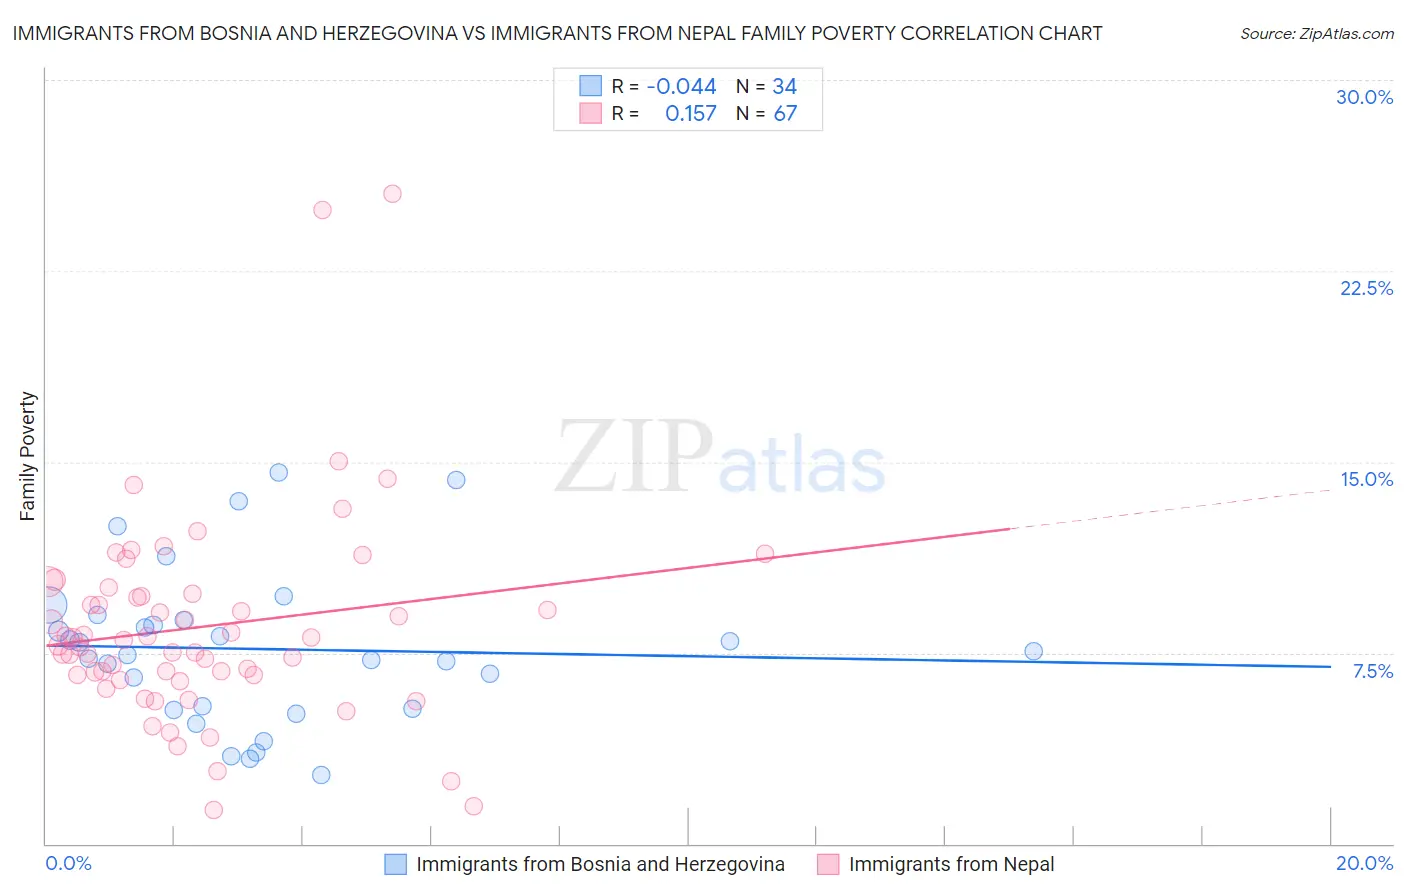 Immigrants from Bosnia and Herzegovina vs Immigrants from Nepal Family Poverty